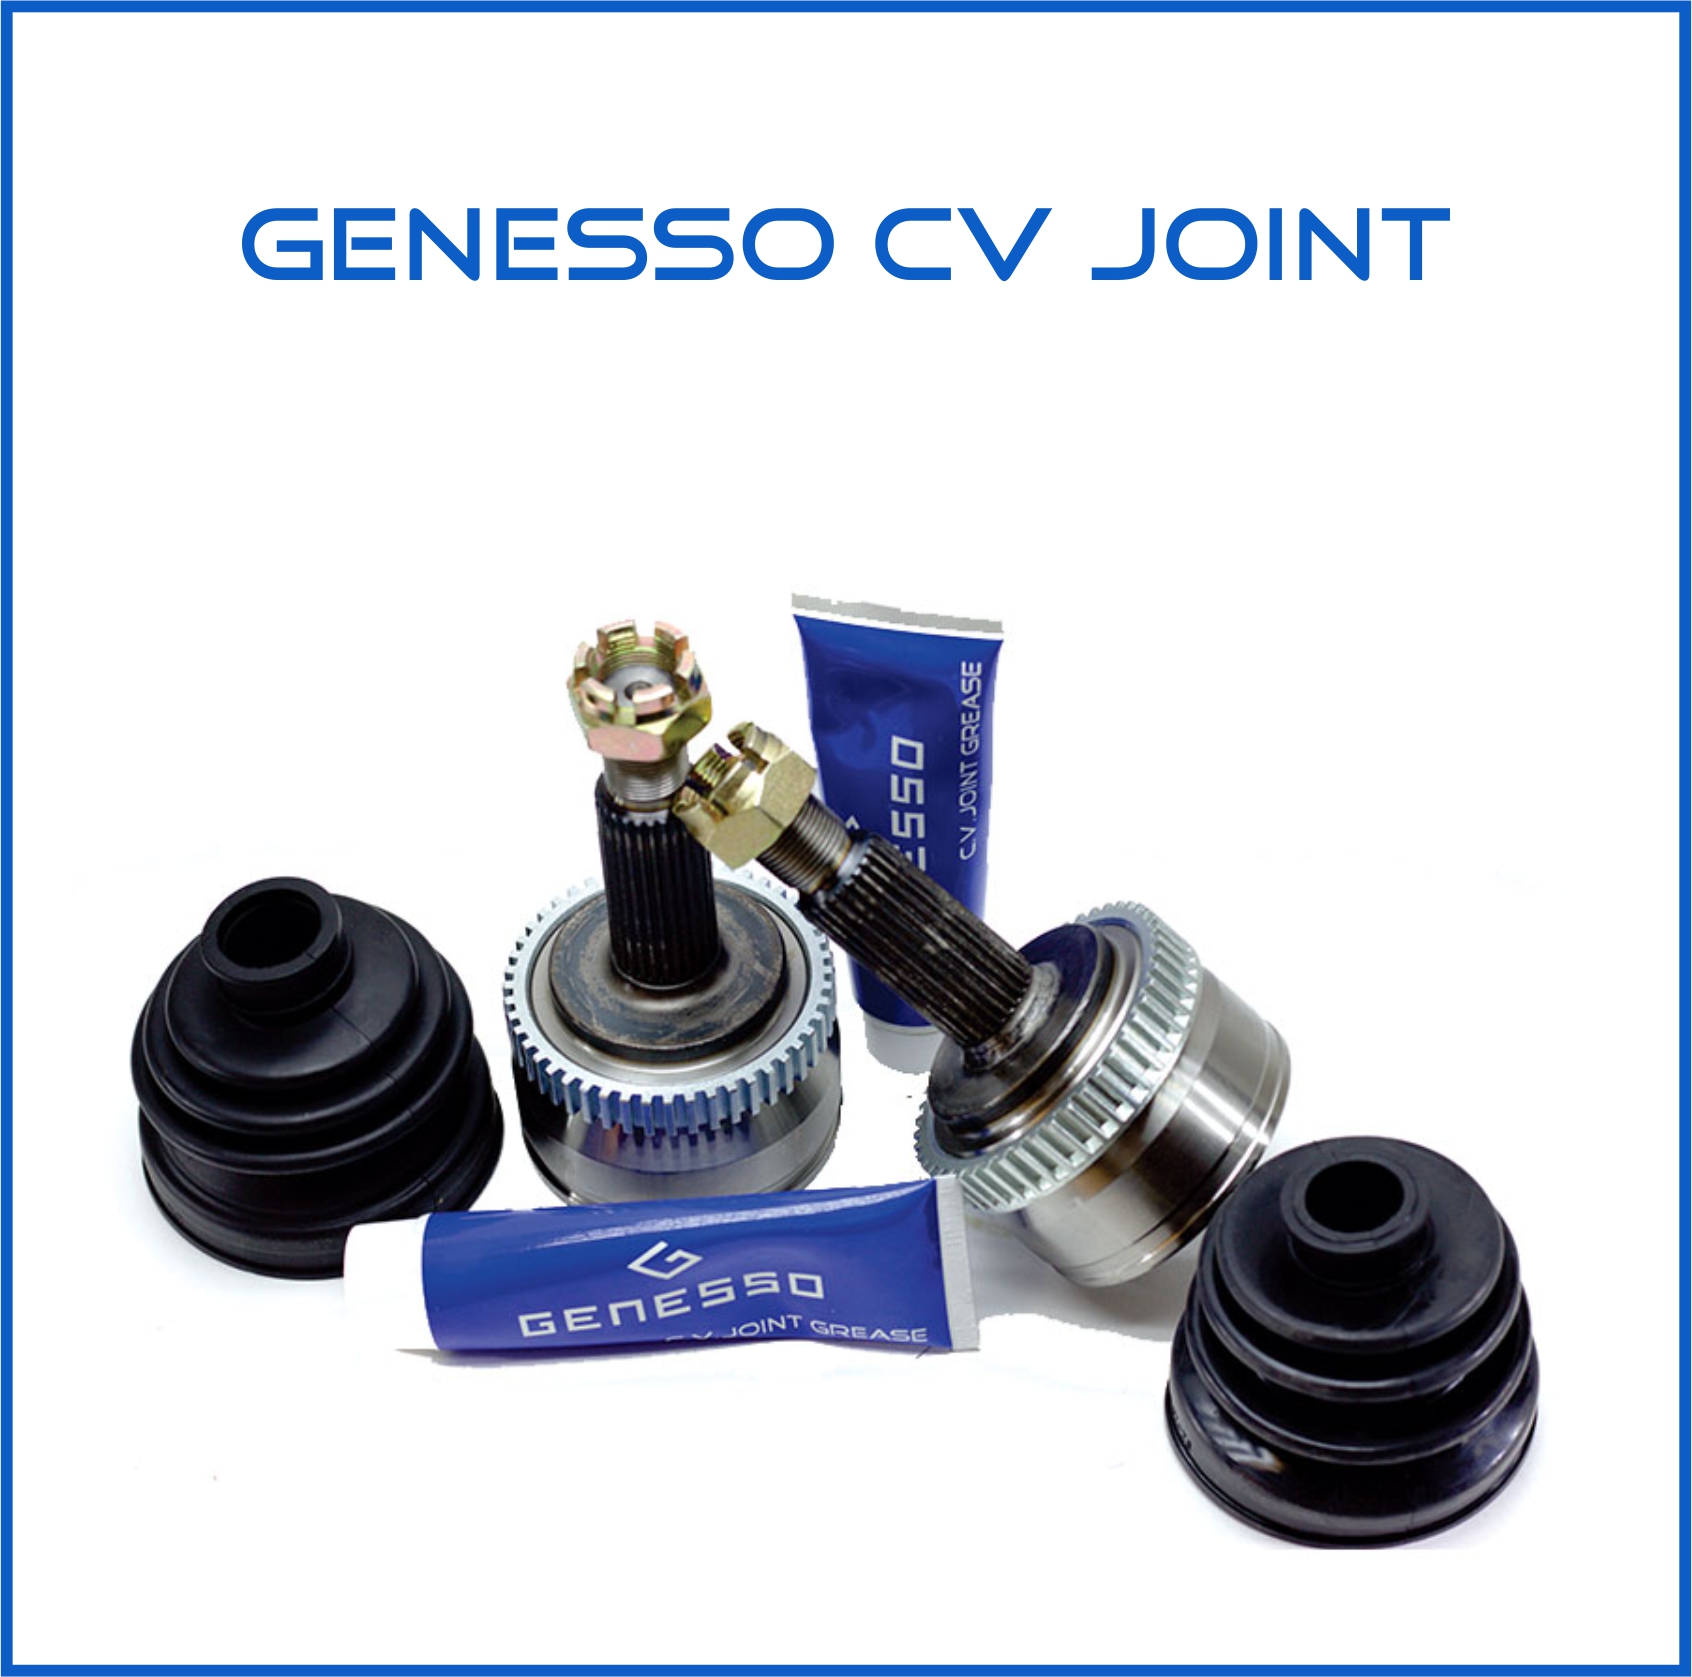 Genesso CV Joint